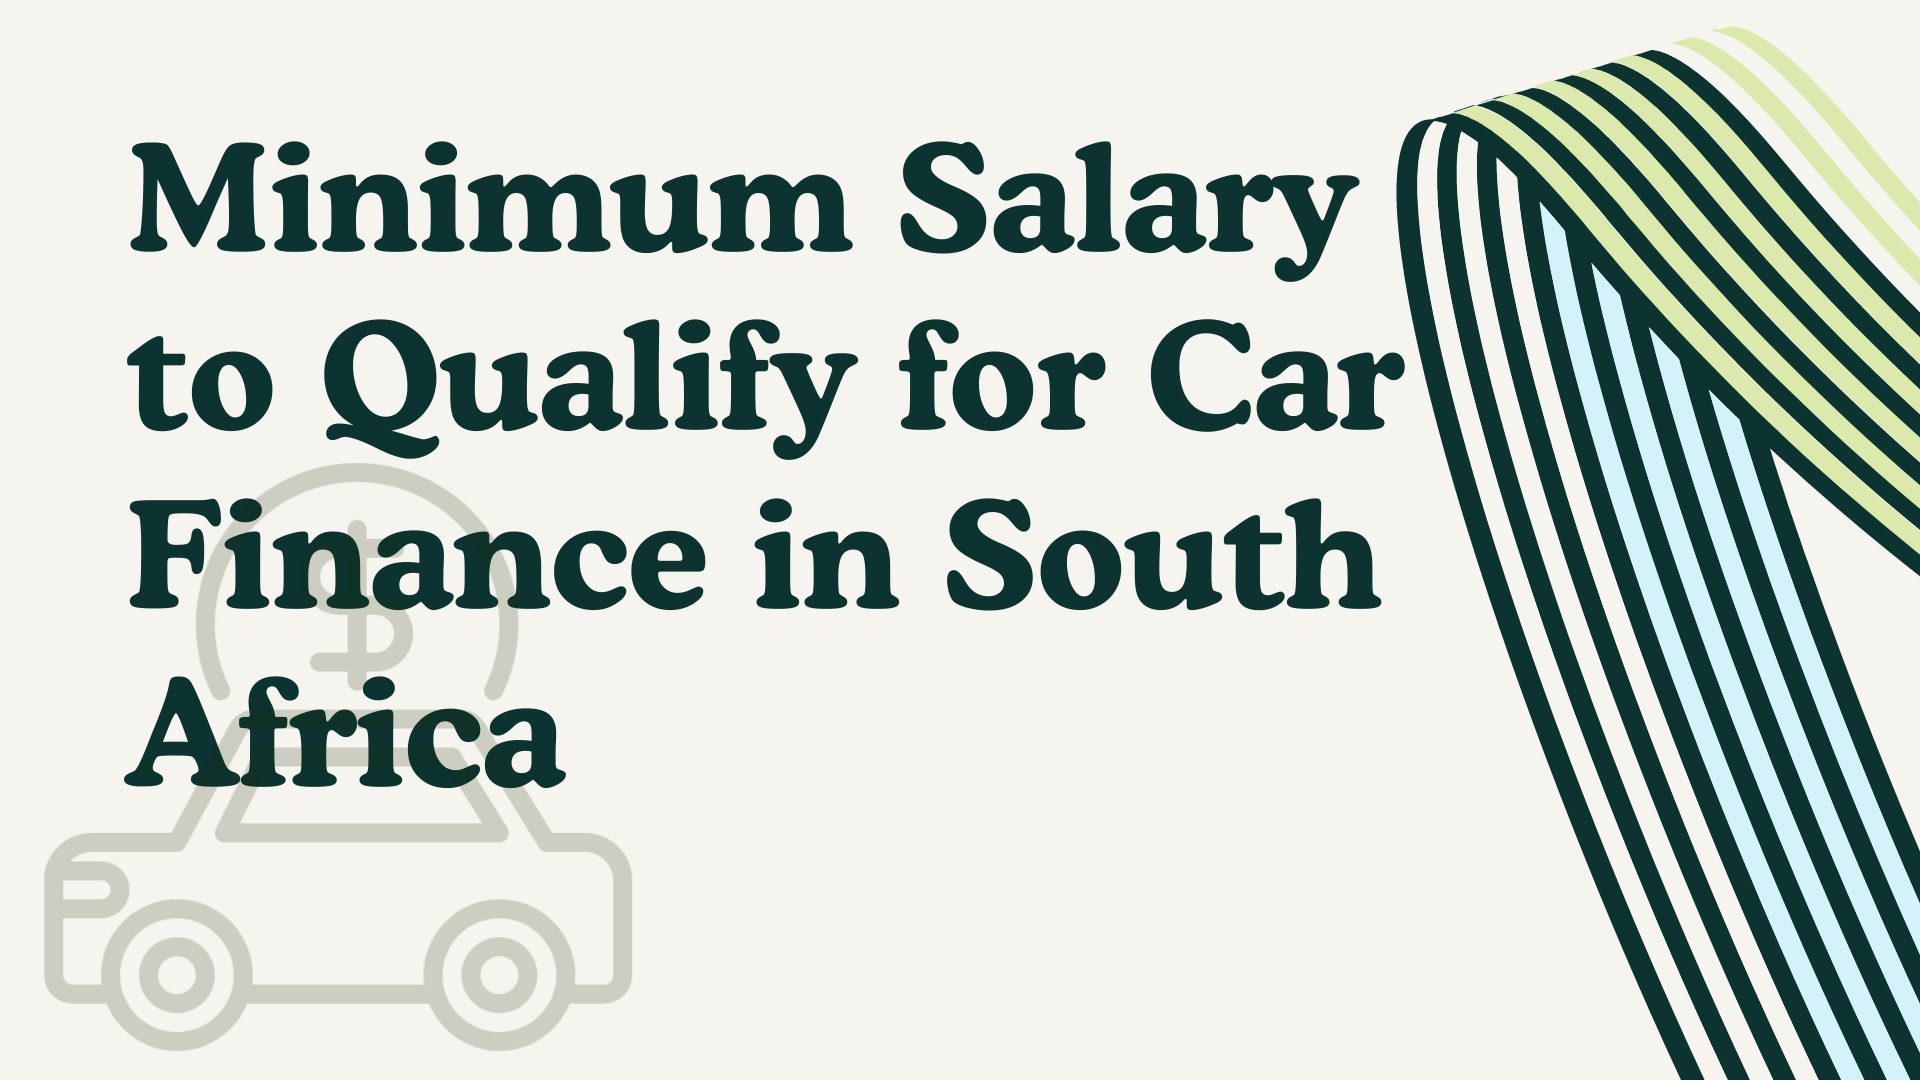 Minimum Salary to Qualify for Car Finance in South Africa